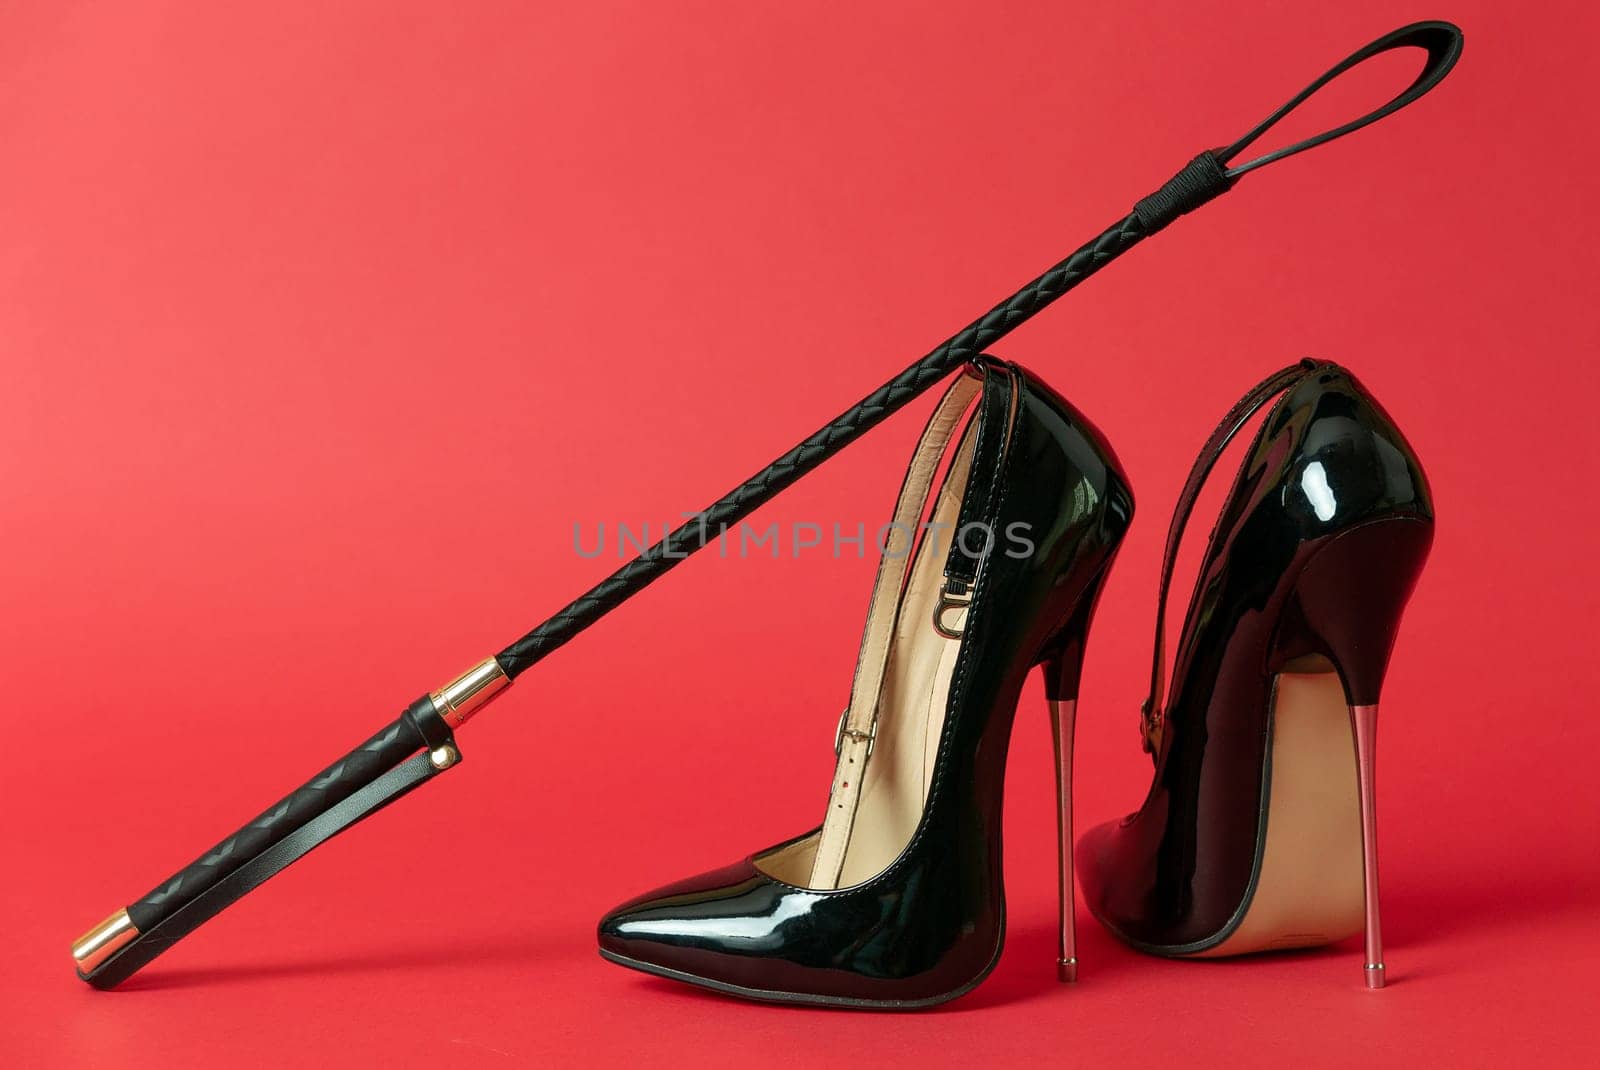 Black shiny high heel shoes and a whip on a red background by zartarn